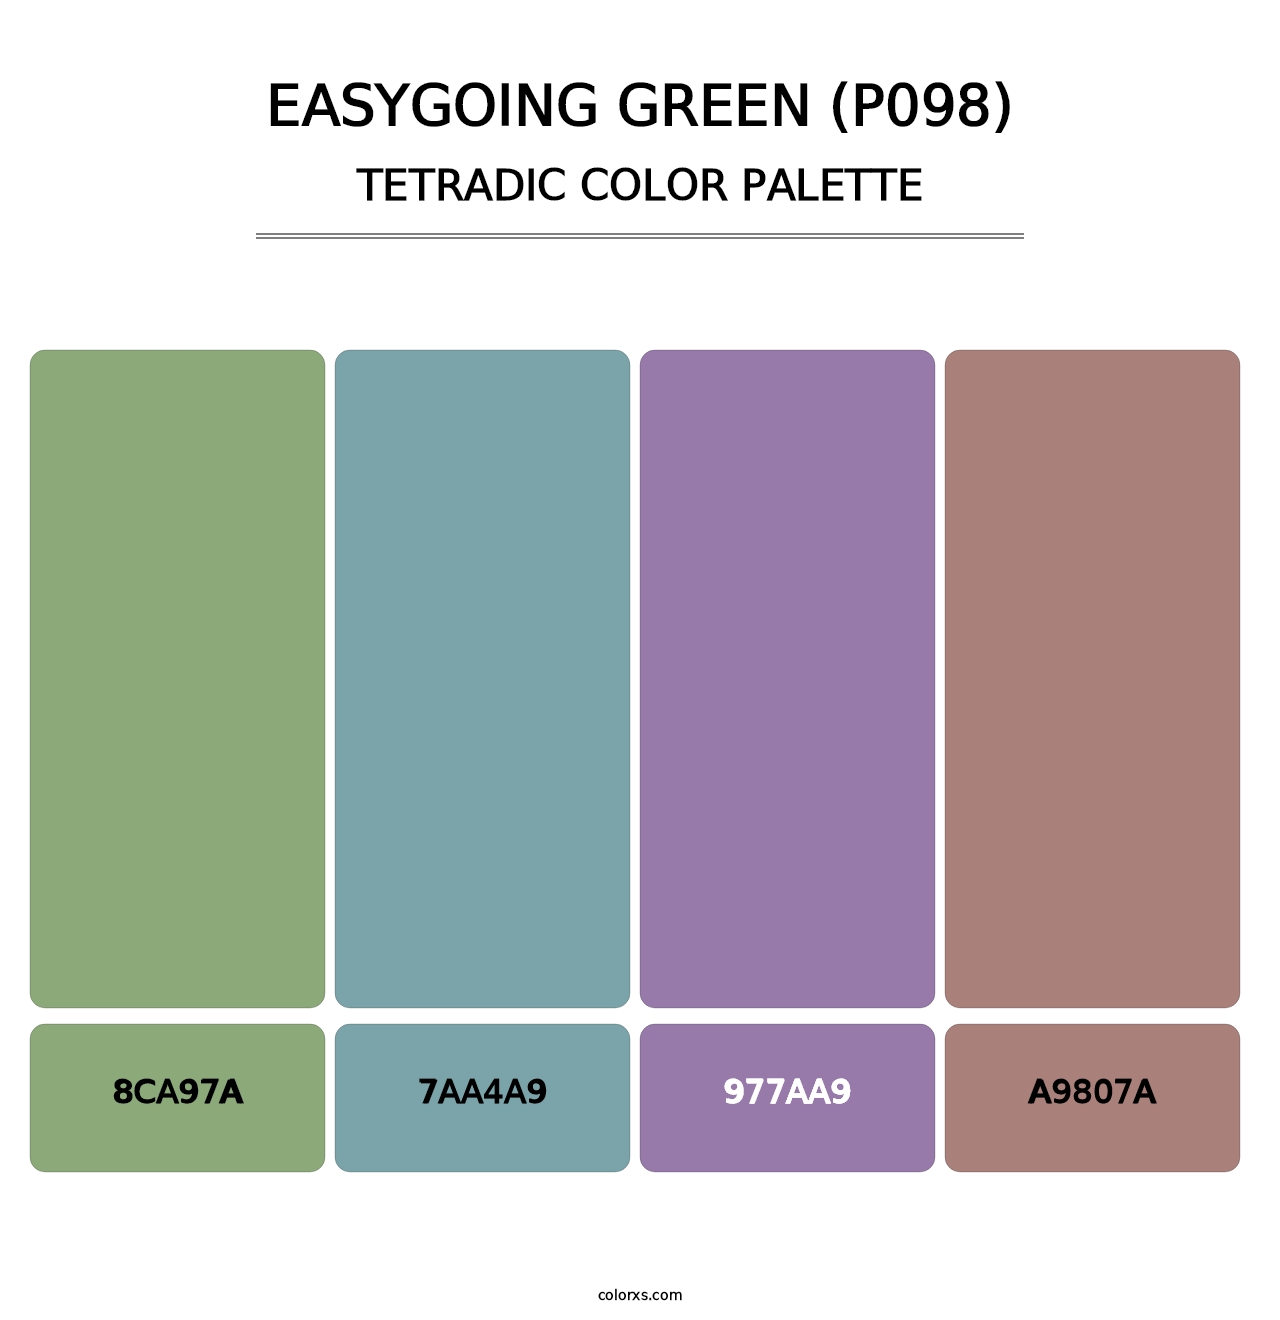 Easygoing Green (P098) - Tetradic Color Palette